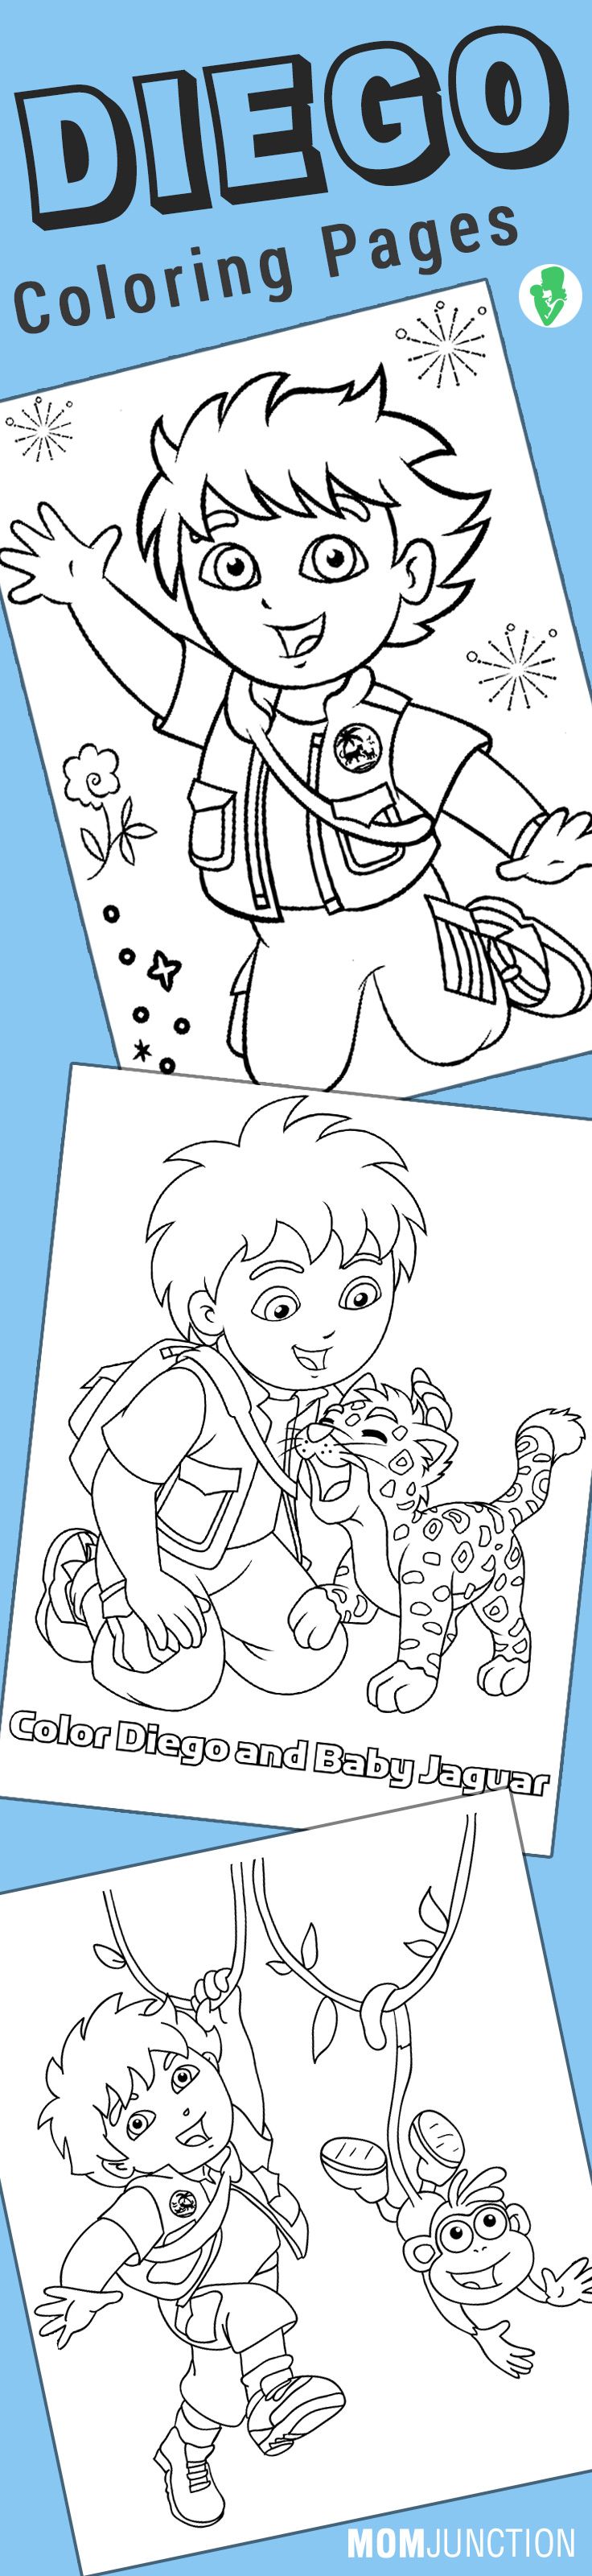 Top 10 Free Printable Diego Coloring Pages Online